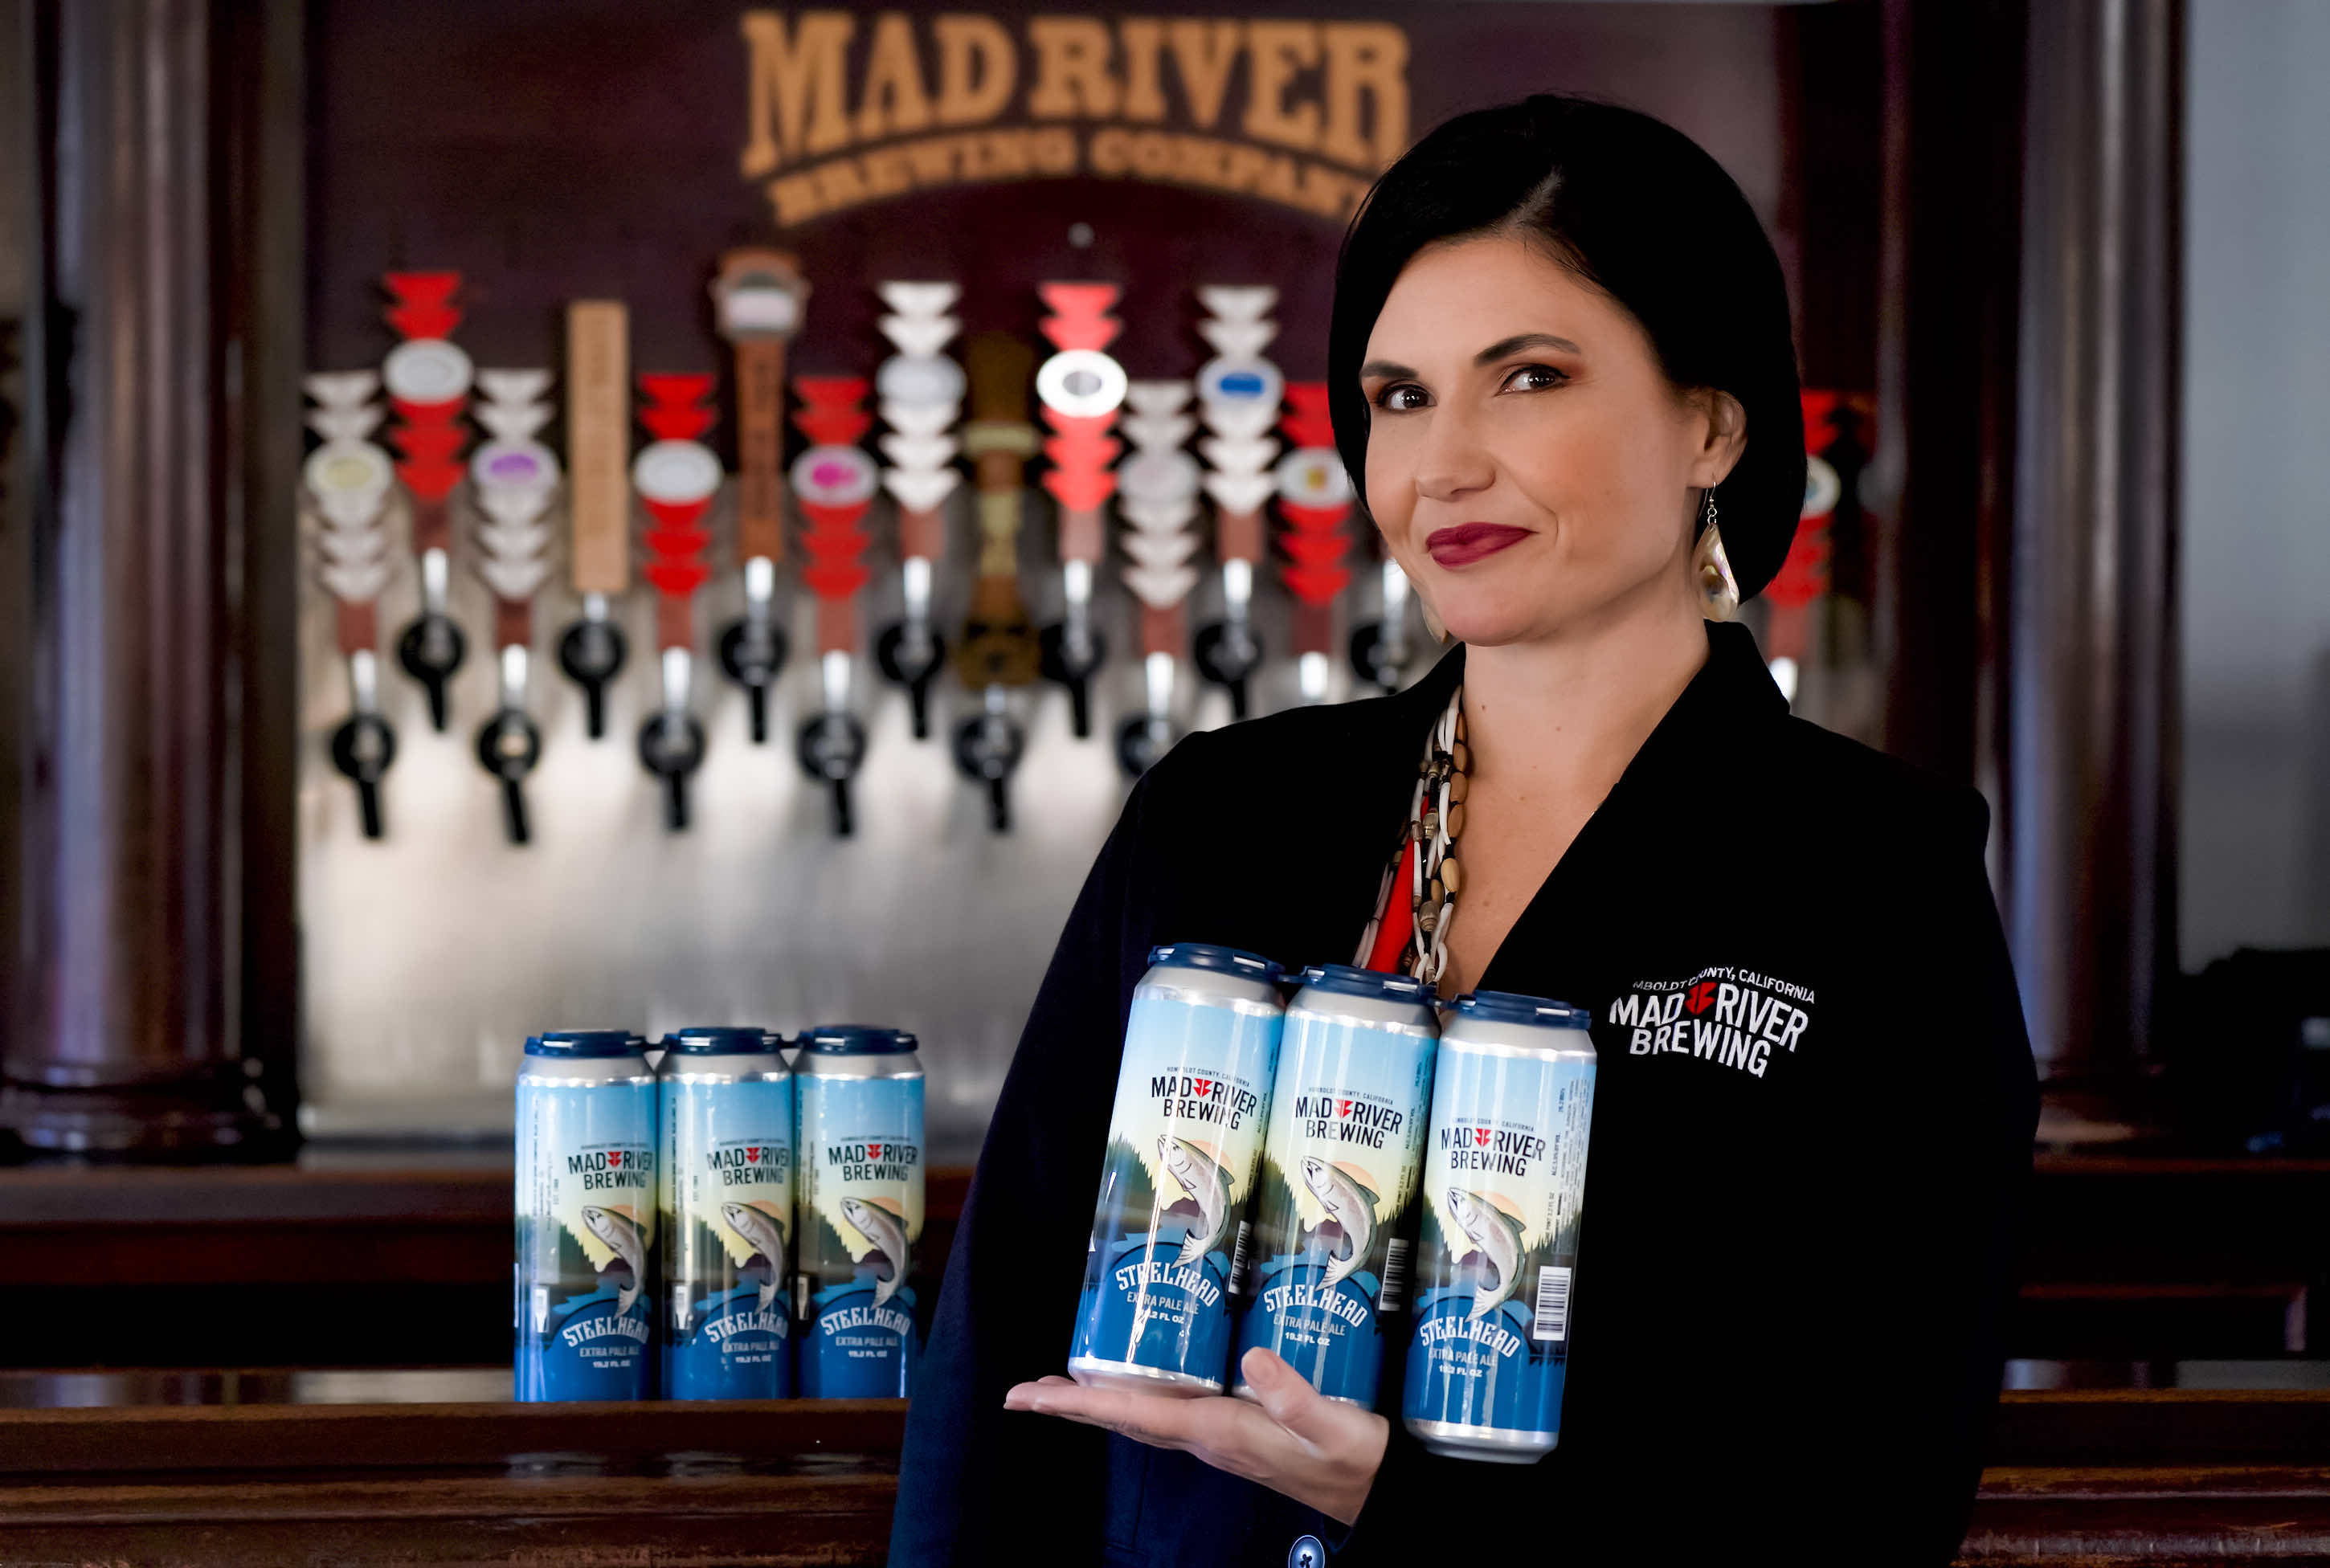 Linda Cooley, Chief Operating Officer and Yurok citizen, holding a 3-pack of Steelhead Extra Pale Ale in 19.2 oz cans. (image courtesy of Mad River Brewing)